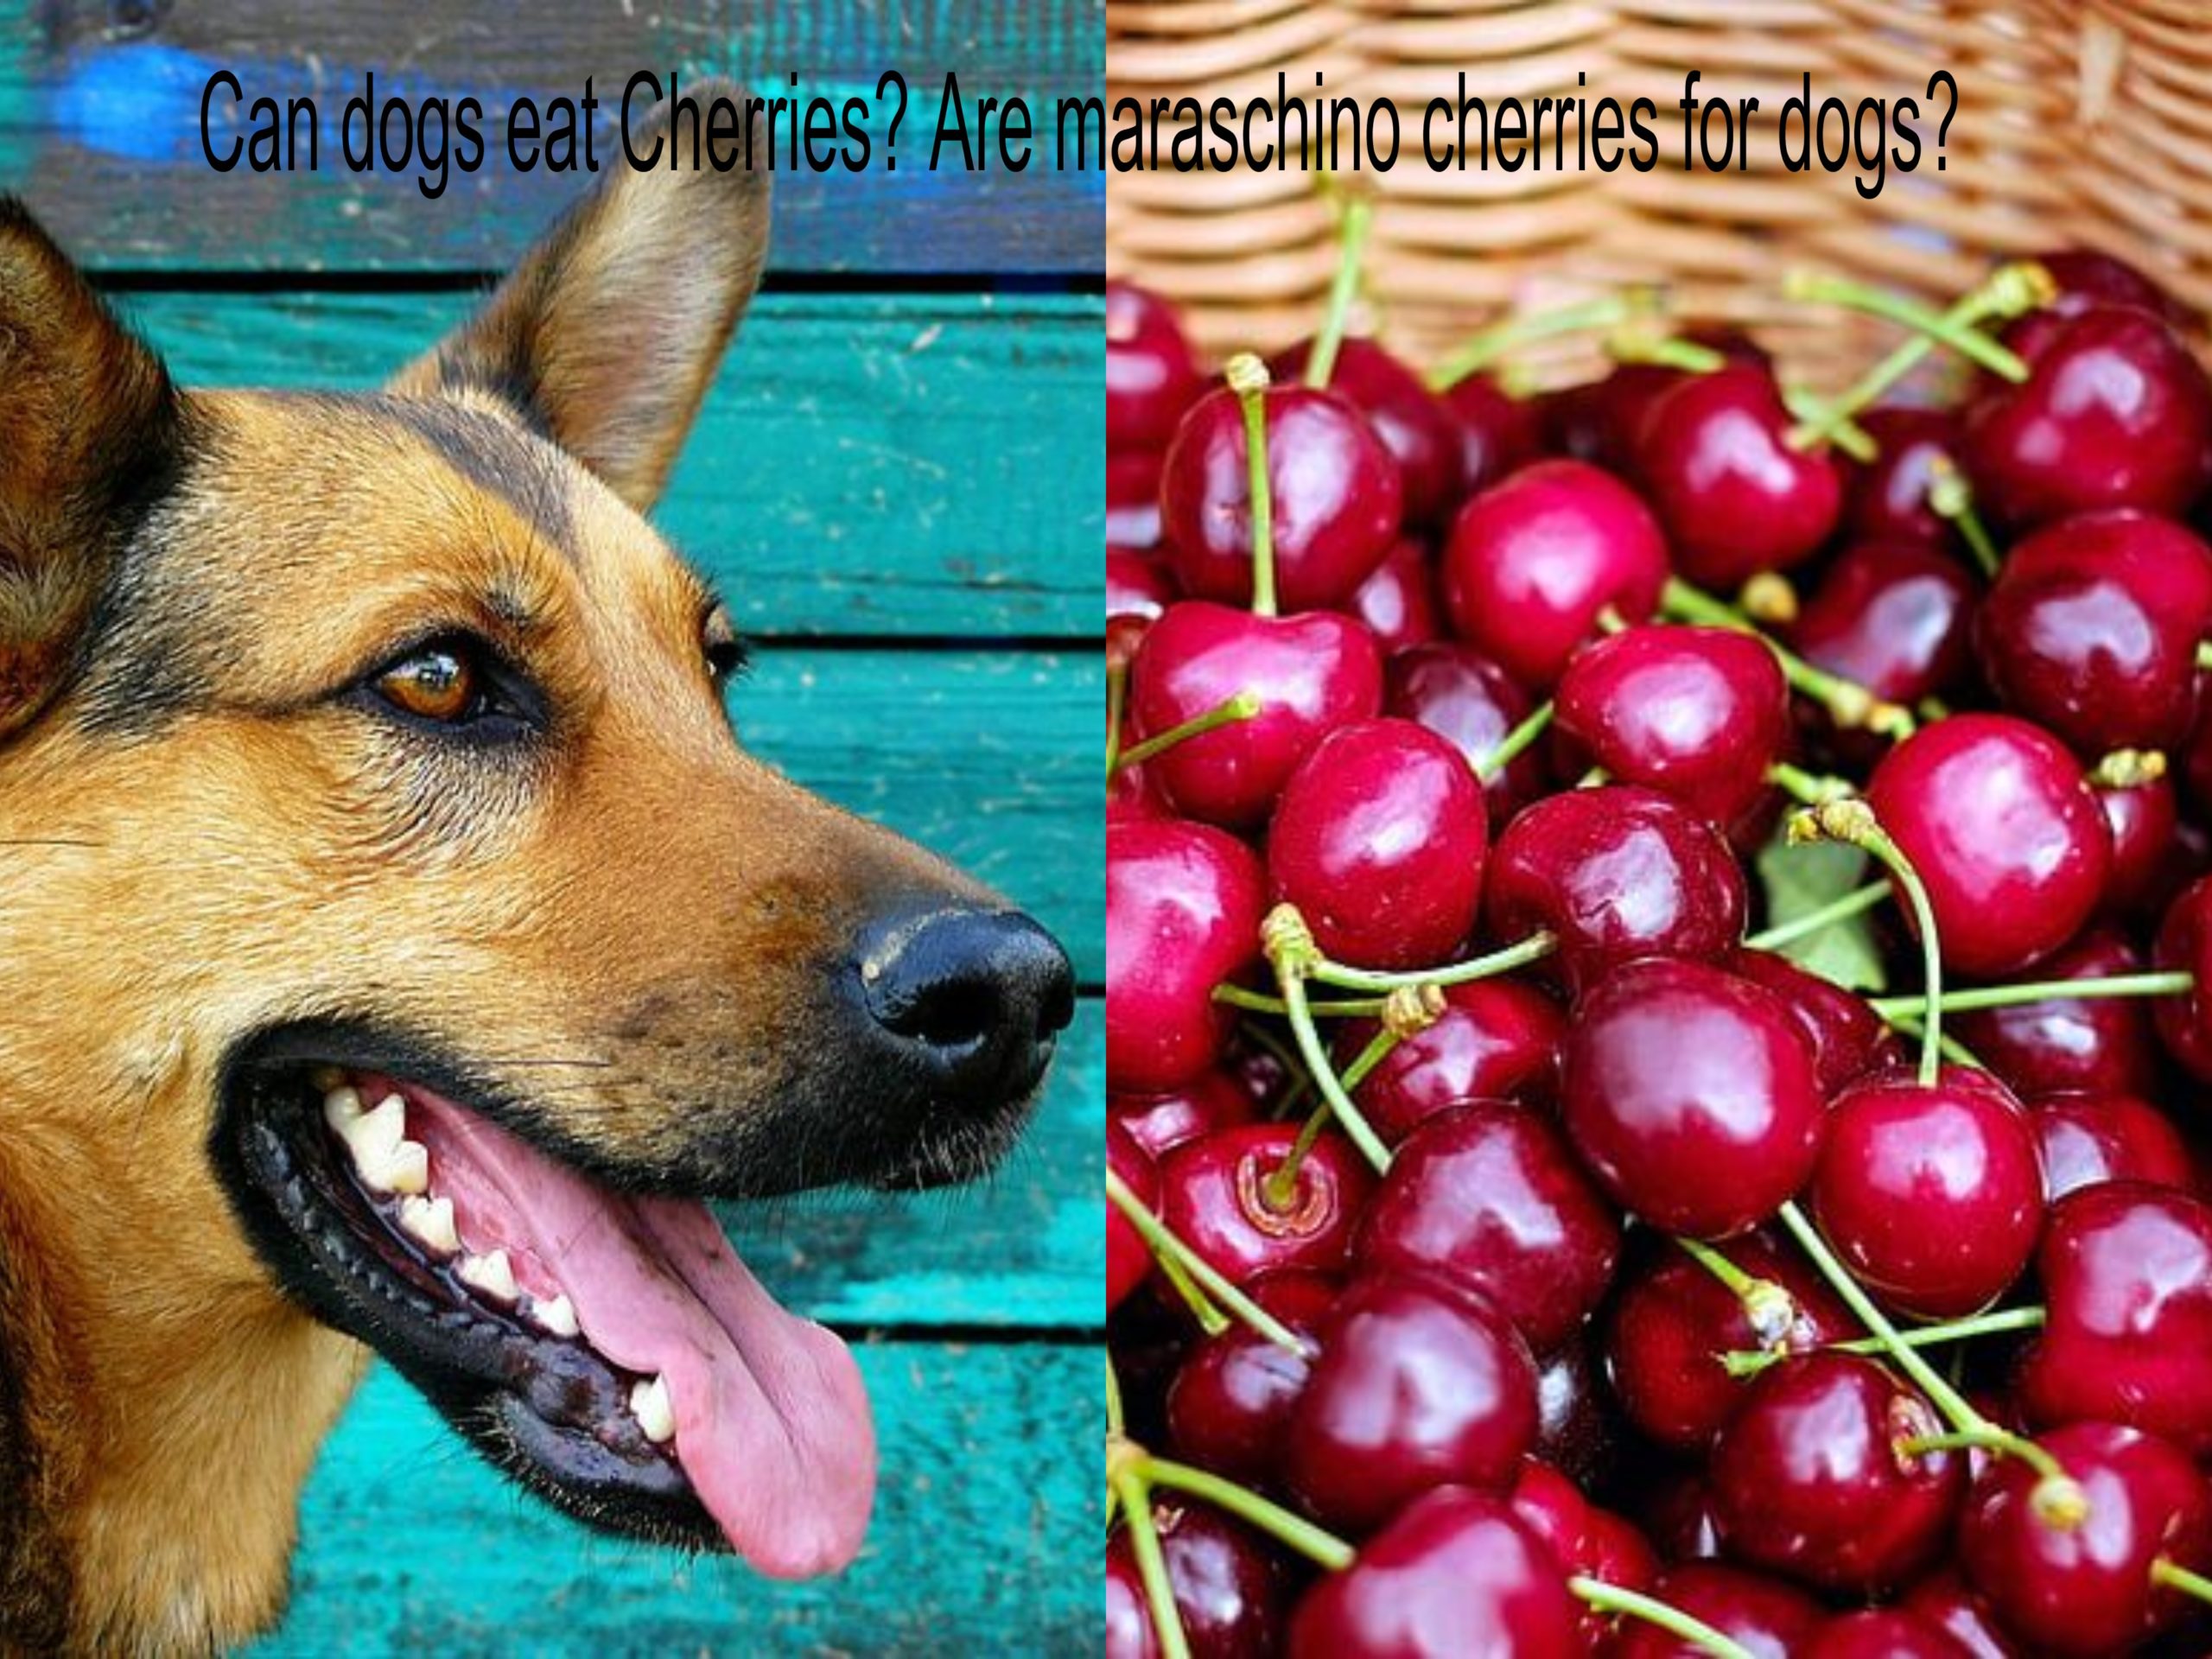 Can dogs eat Cherries